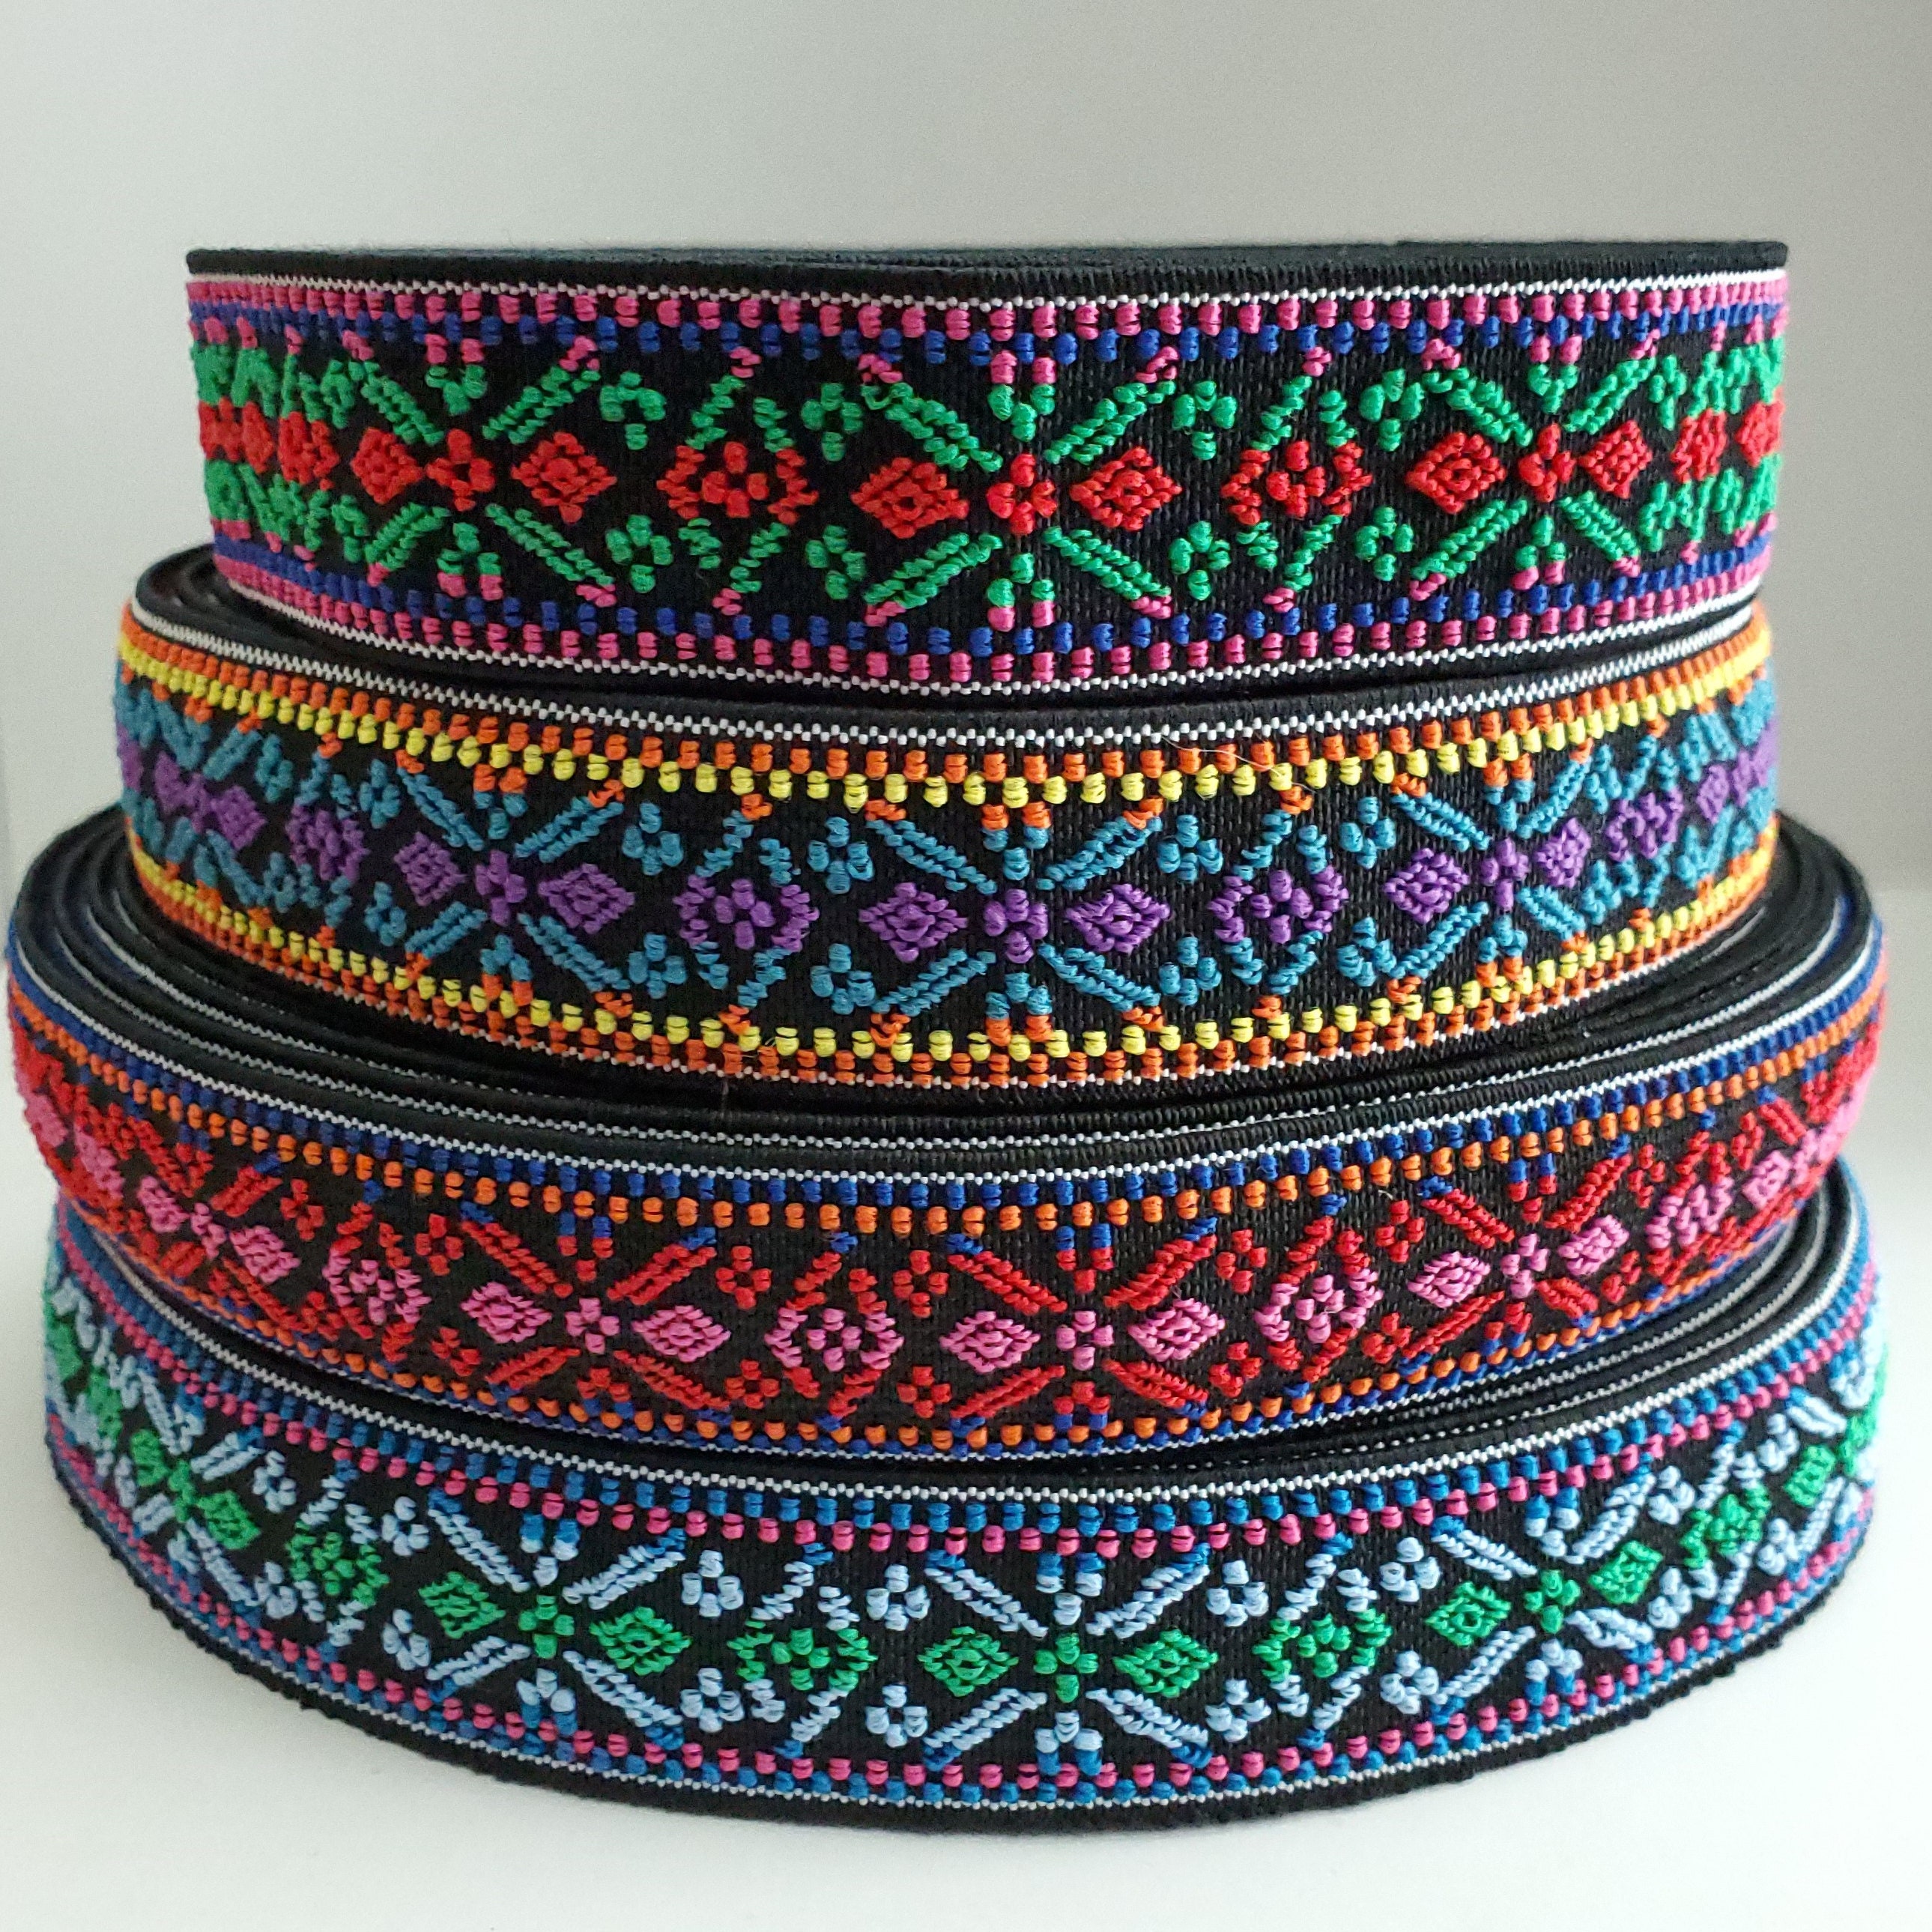 3 Inch 75mm Wide Colored Patterned Elastic Band // Waistband